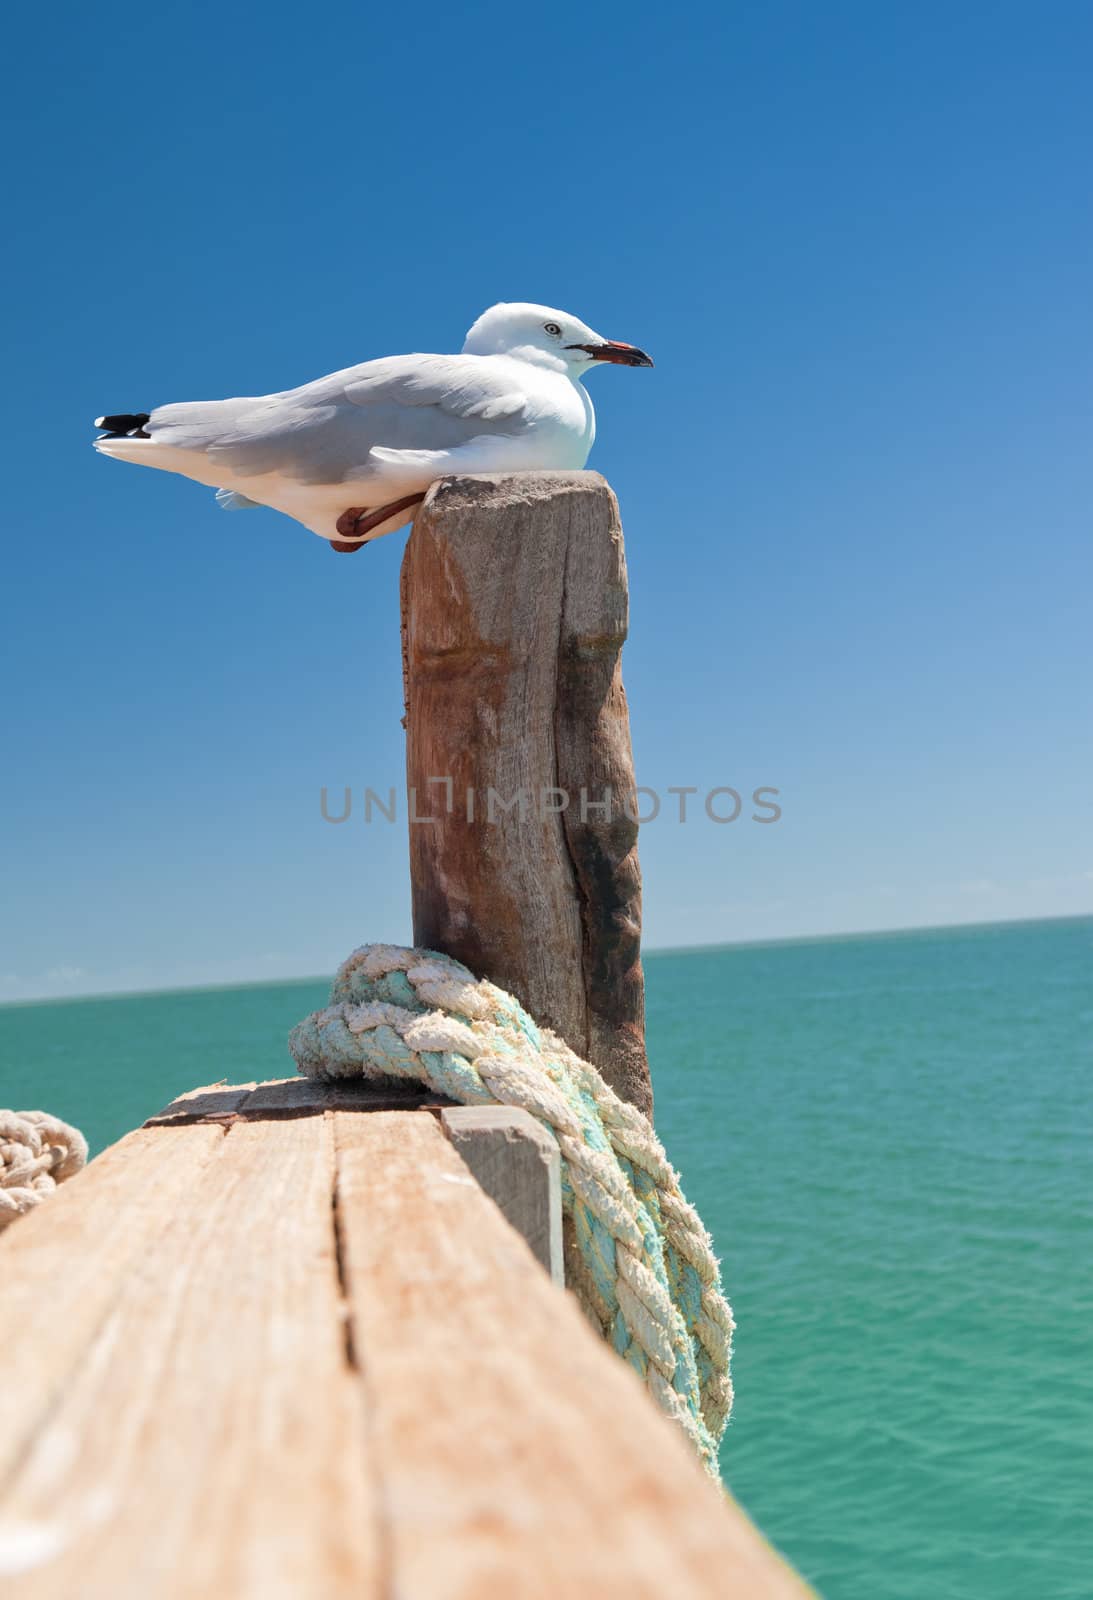 An image of a nice seagull at the sea